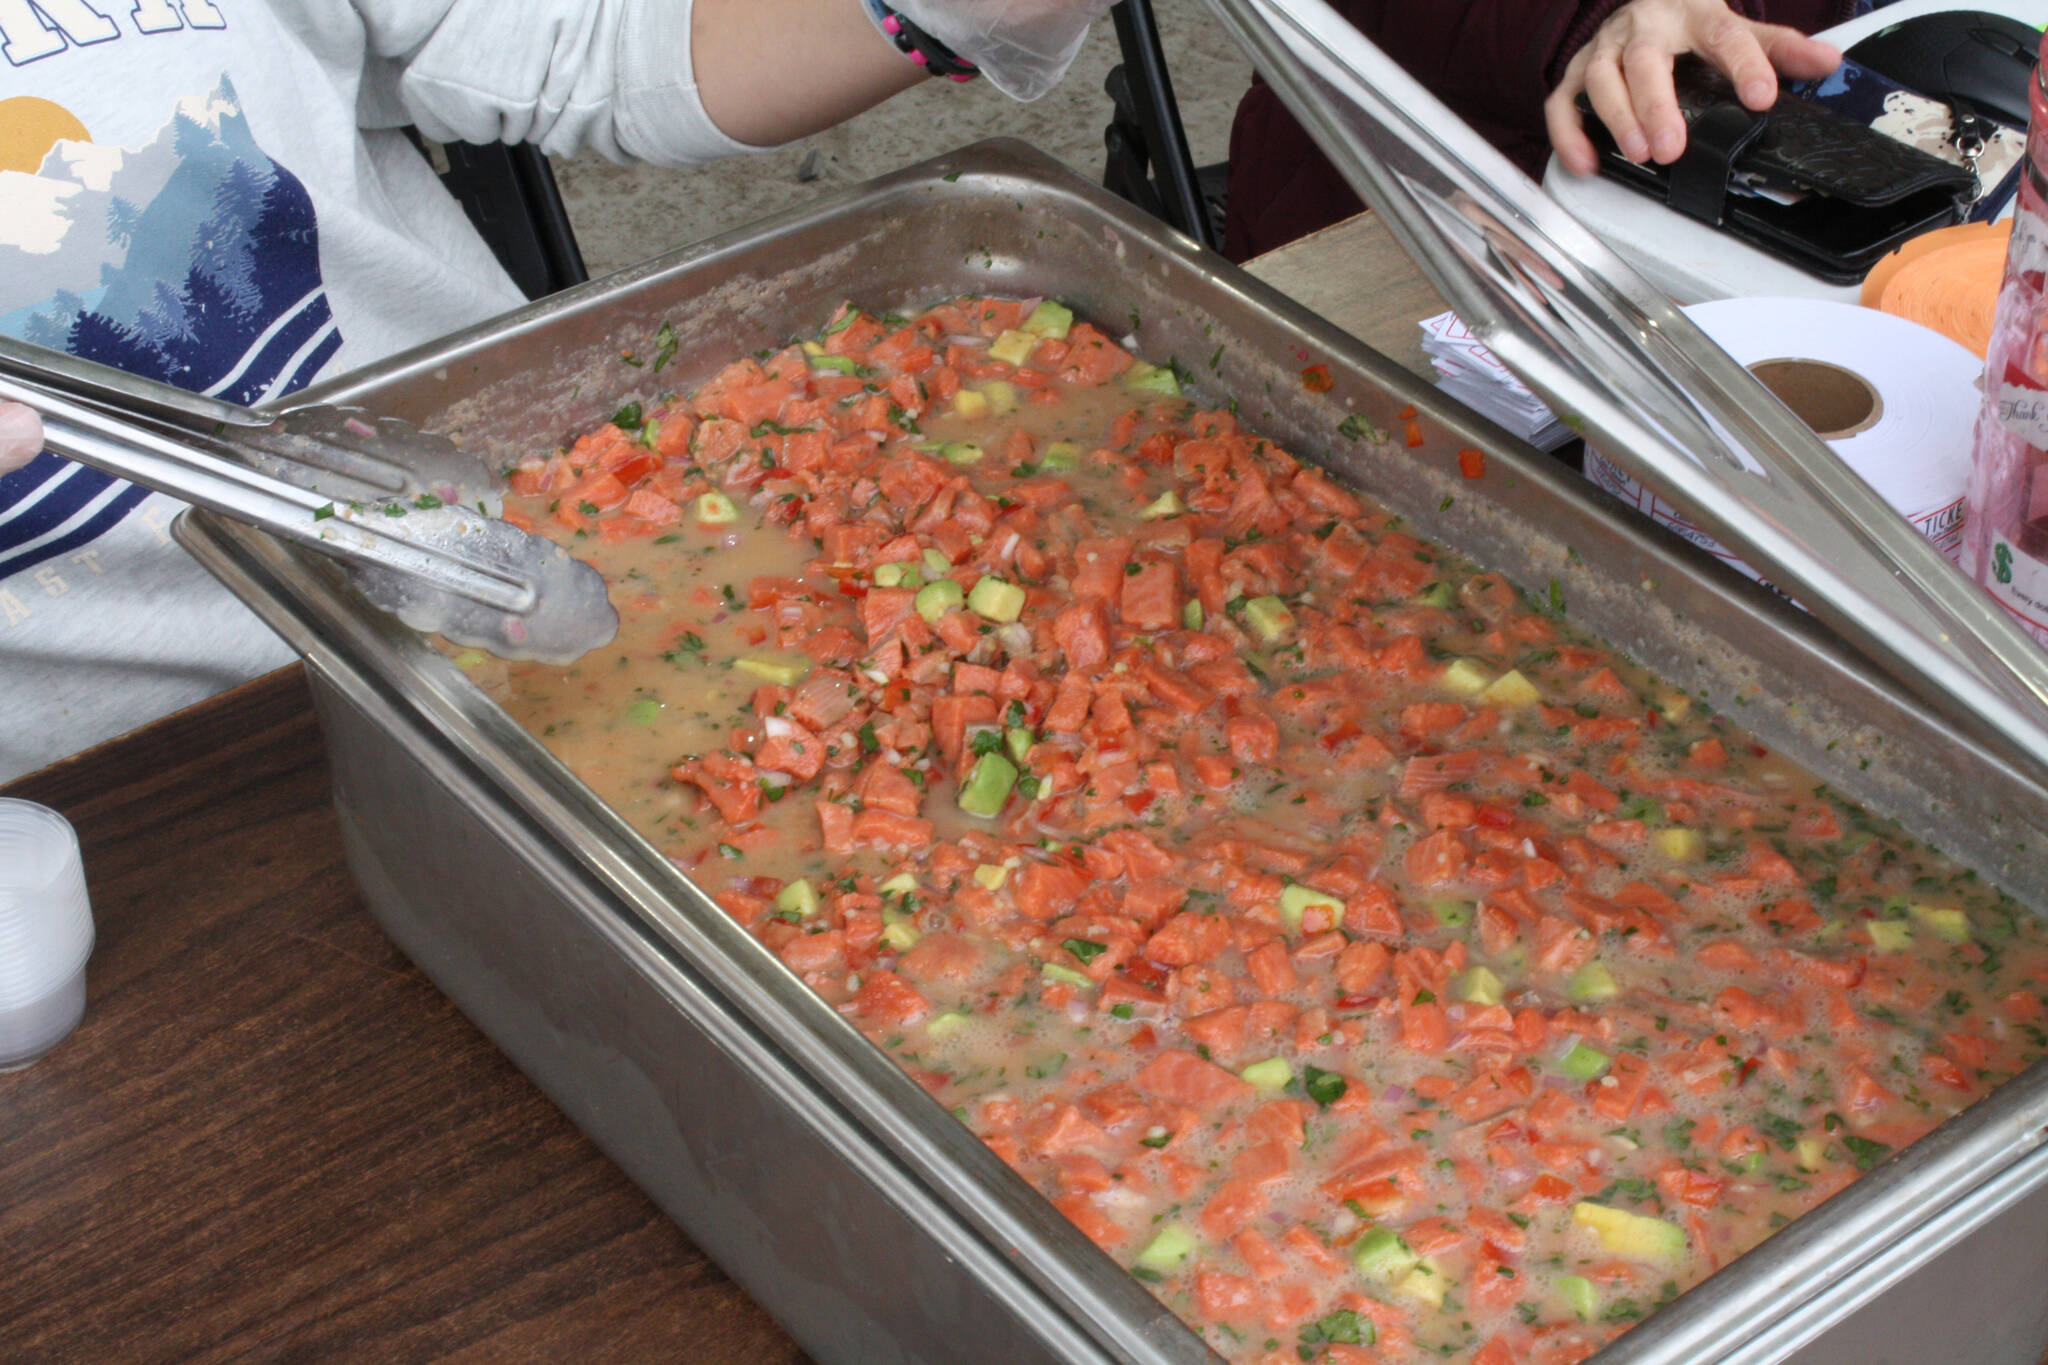 Kenai Peninsula Food Bank volunteers serve ceviche during their fundraiser at Soldotna Creek Park on Thursday, July 21, 2022. (Camille Botello/Peninsula Clarion)